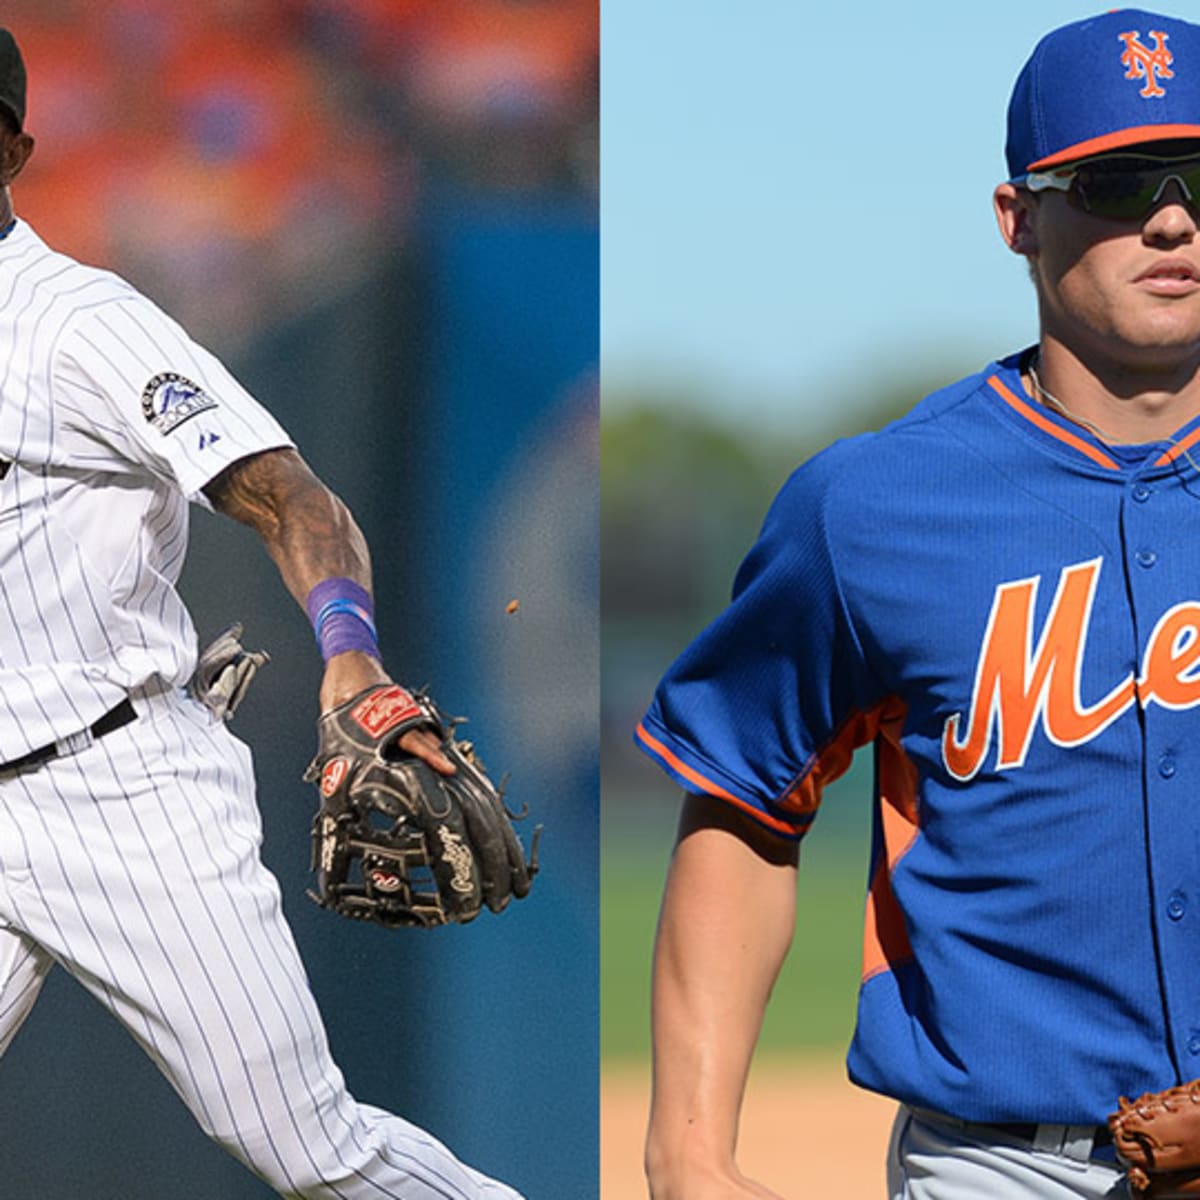 Jose Reyes and Wilmer Flores Team Up to Lead the Mets - The New York Times